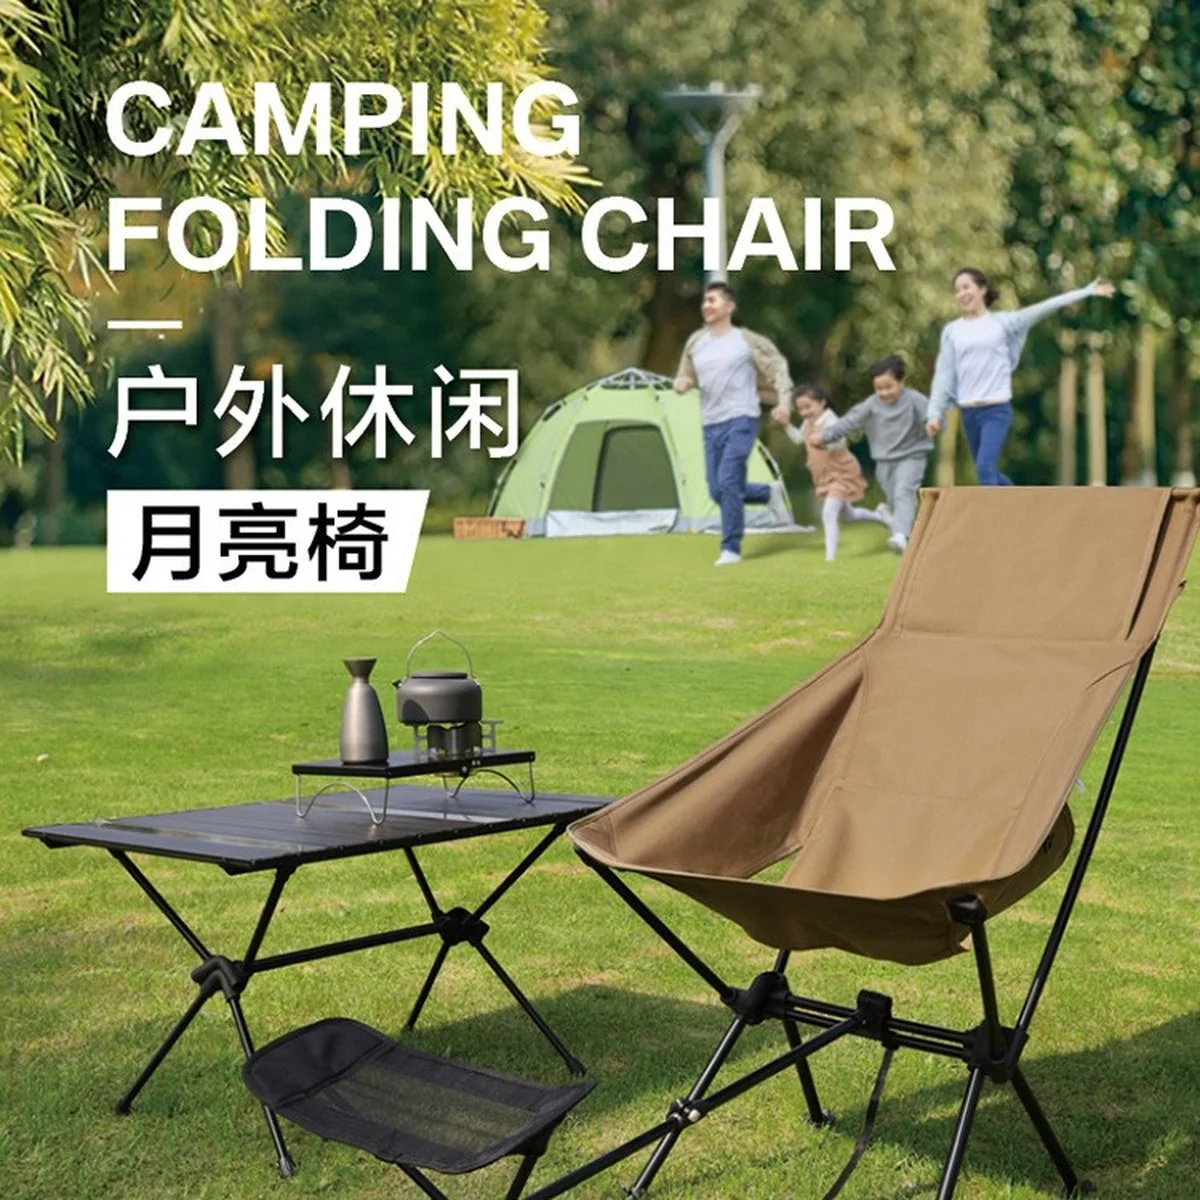 Enlarge Outdoor Portable Folding Chair Ultra-light Aluminum Alloy Moon Chair High Back Fishing Camping Chair Backrest Leisure Beach